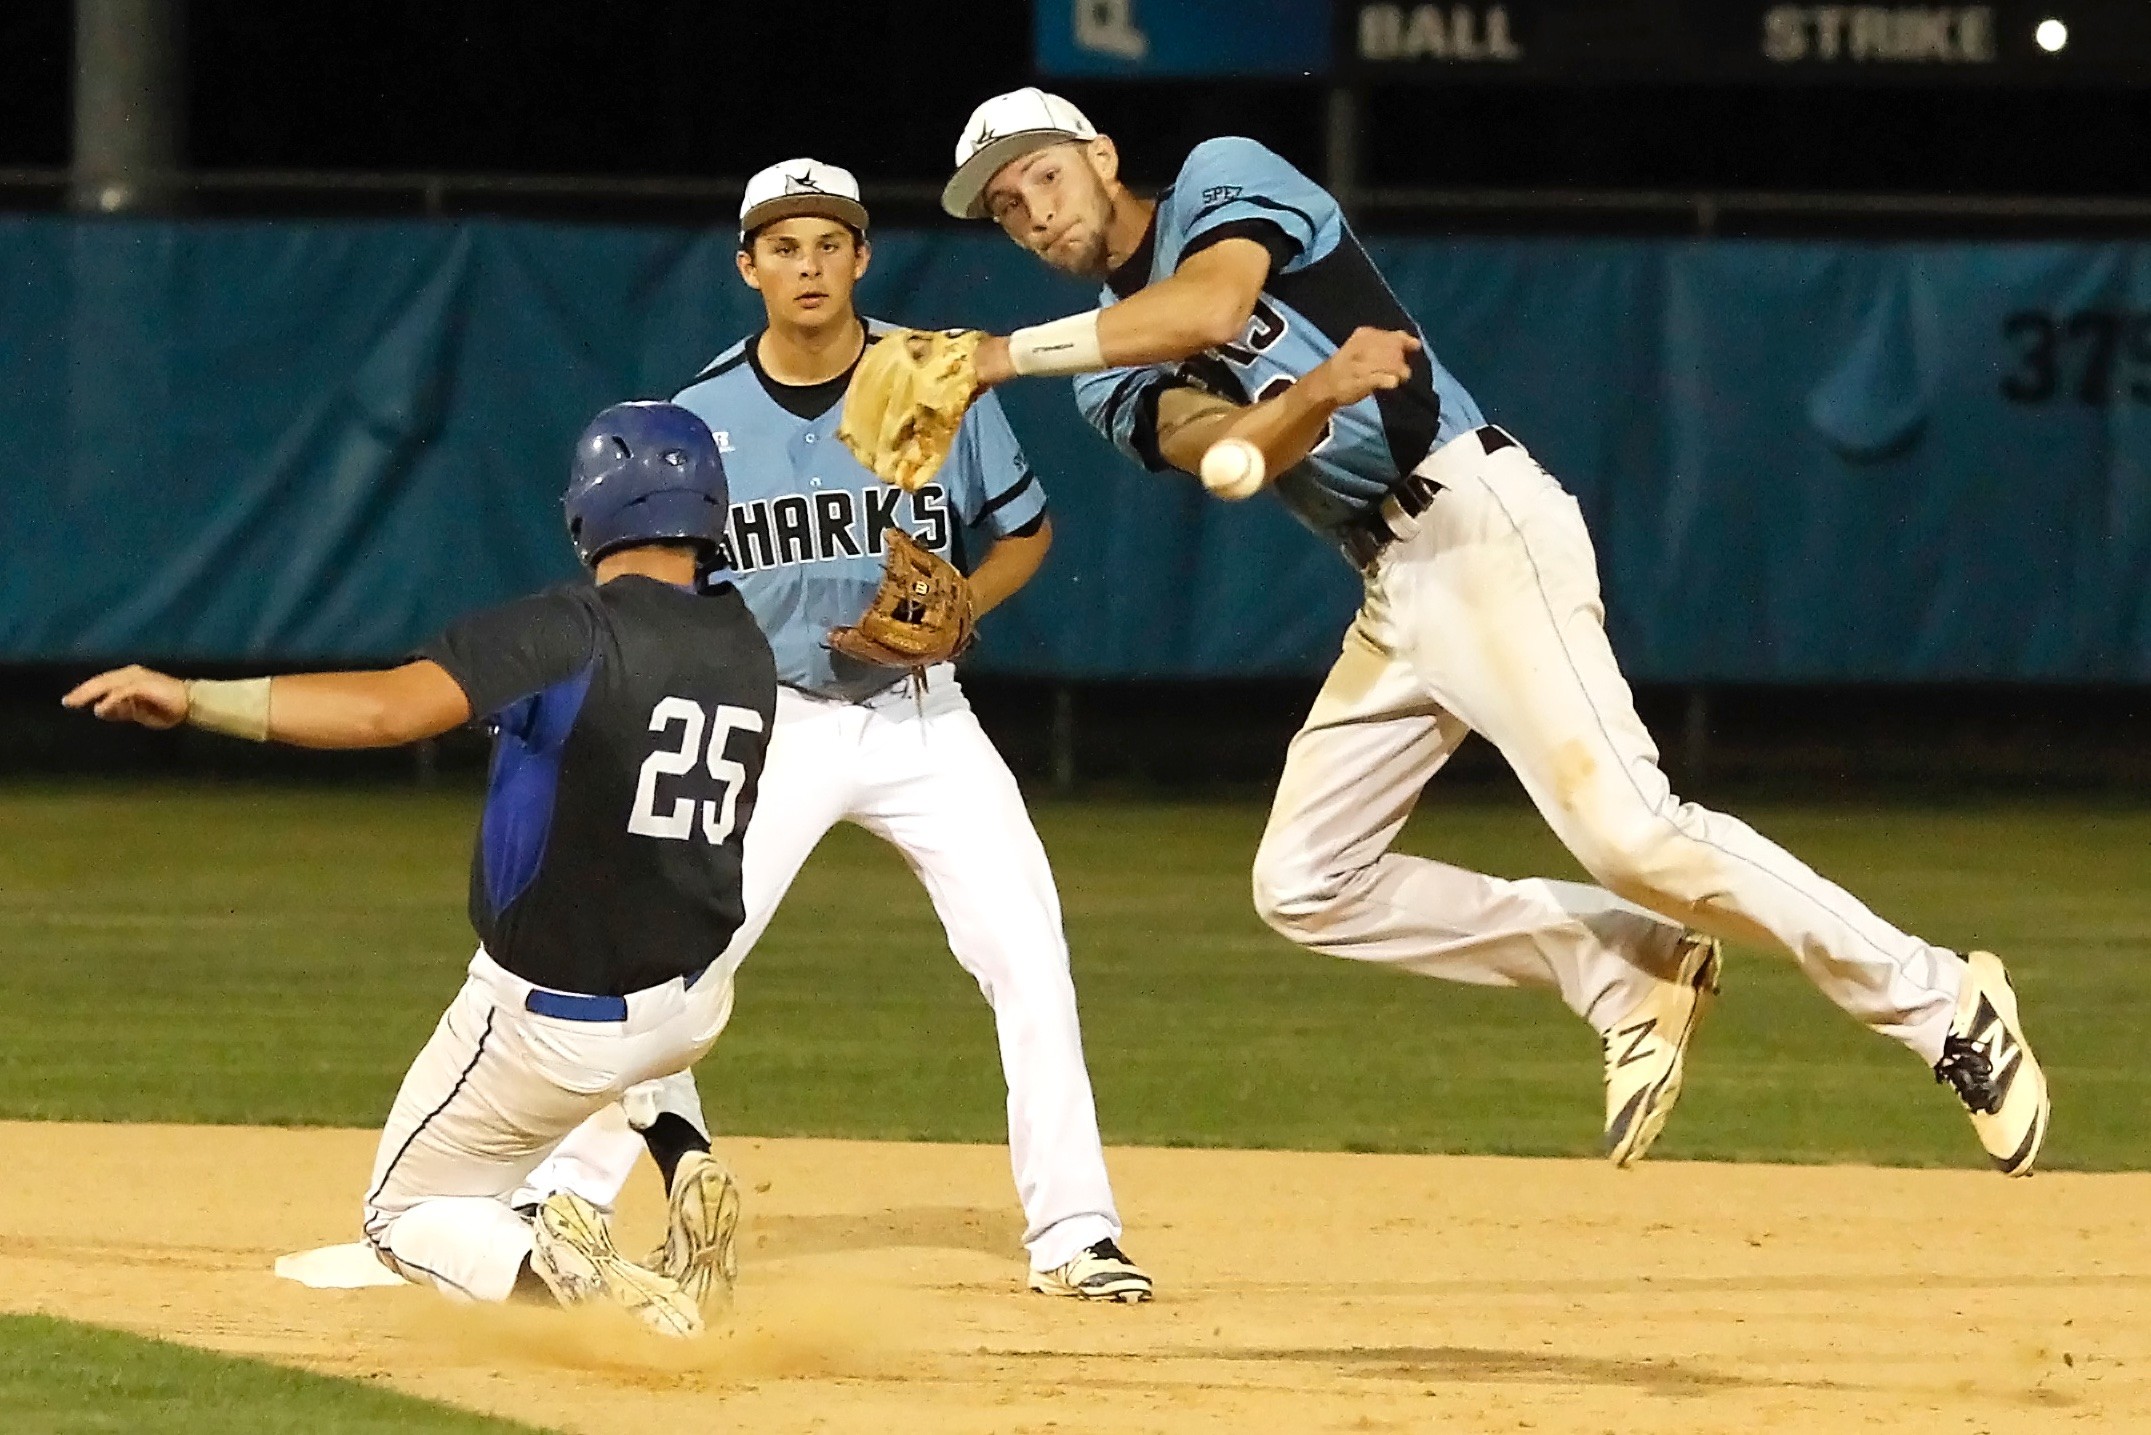 Ponte Vedra second baseman, Quinton Brehm, fields a tricky grounder and throws to first to get the runner.